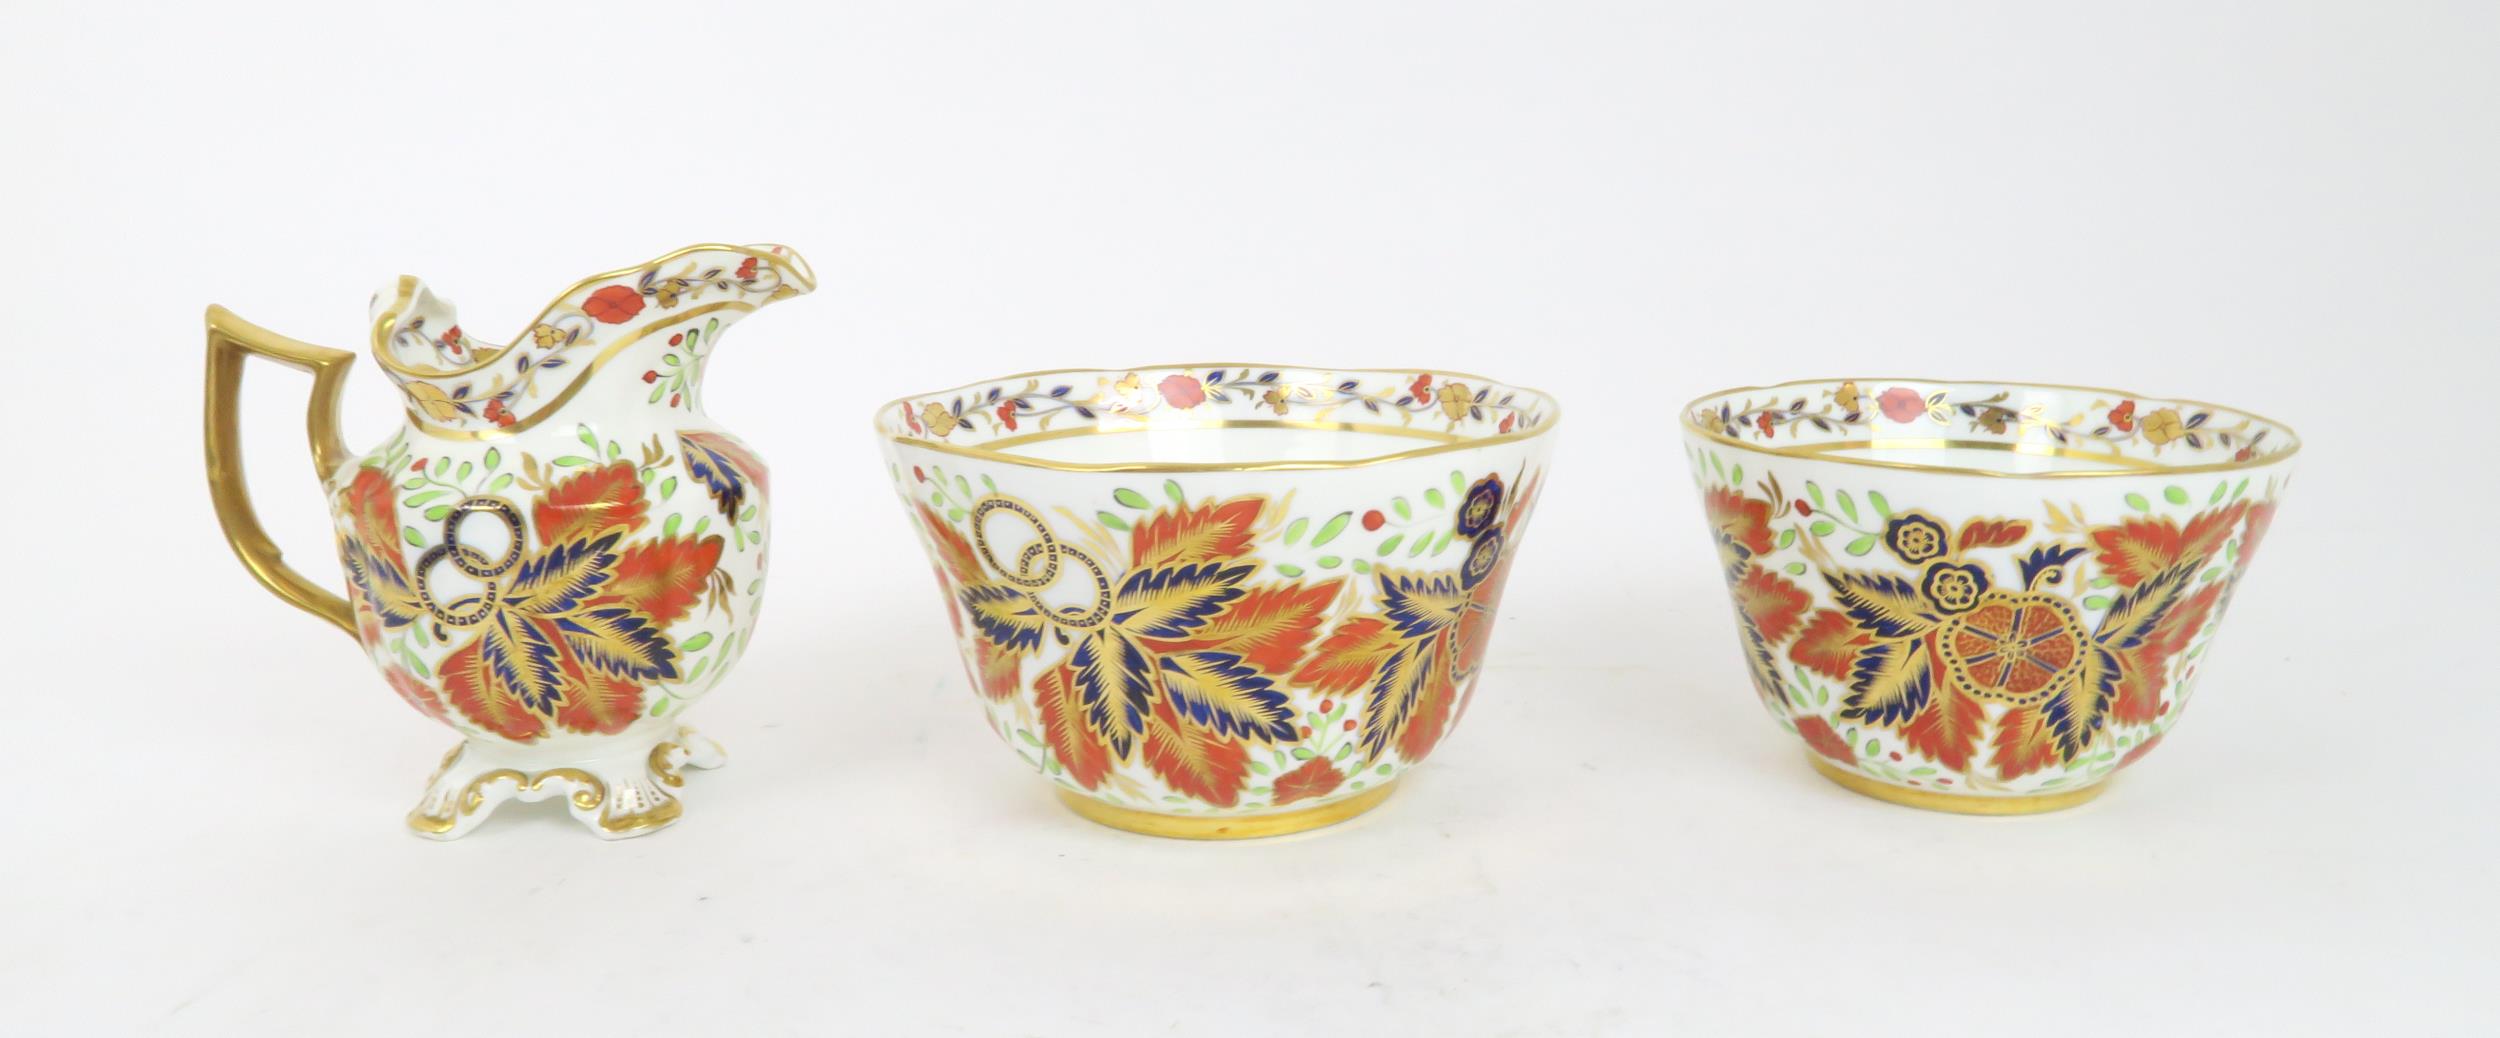 A LATE 19TH CENTURY COPELAND TEA SERVICE in pattern 1559, decorated in the imari palette with leaves - Image 10 of 10